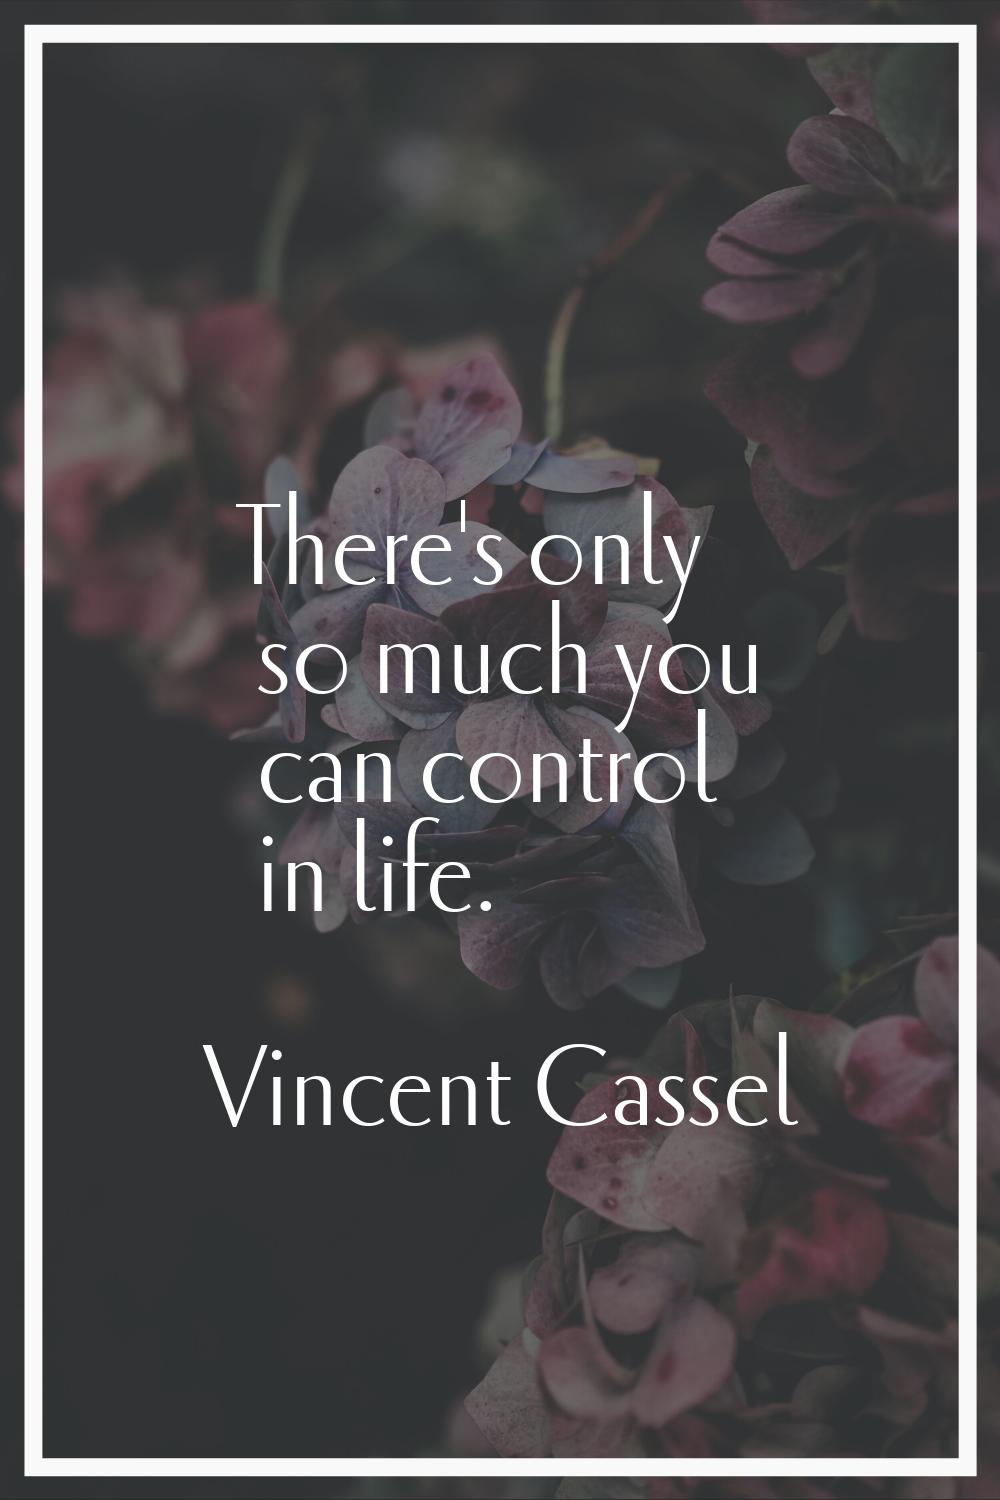 There's only so much you can control in life.